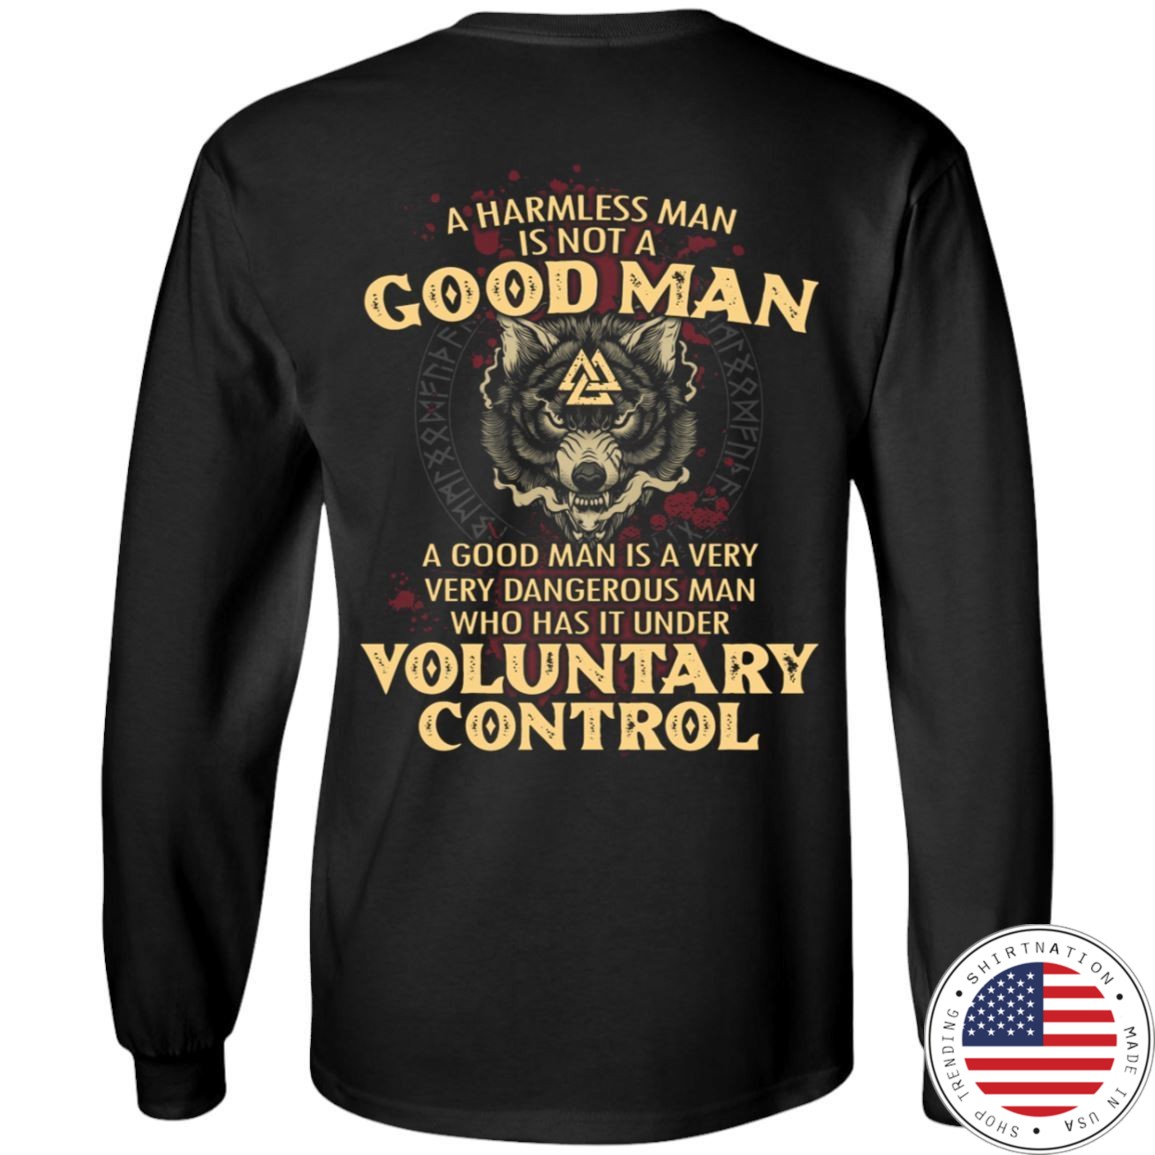 viking norse gym t shirt apparel a harmless man is not a good man backapparel heathen by nature authentic viking products long sleeve ultra cotton t shirtblacks 812221 1024x1024@2x